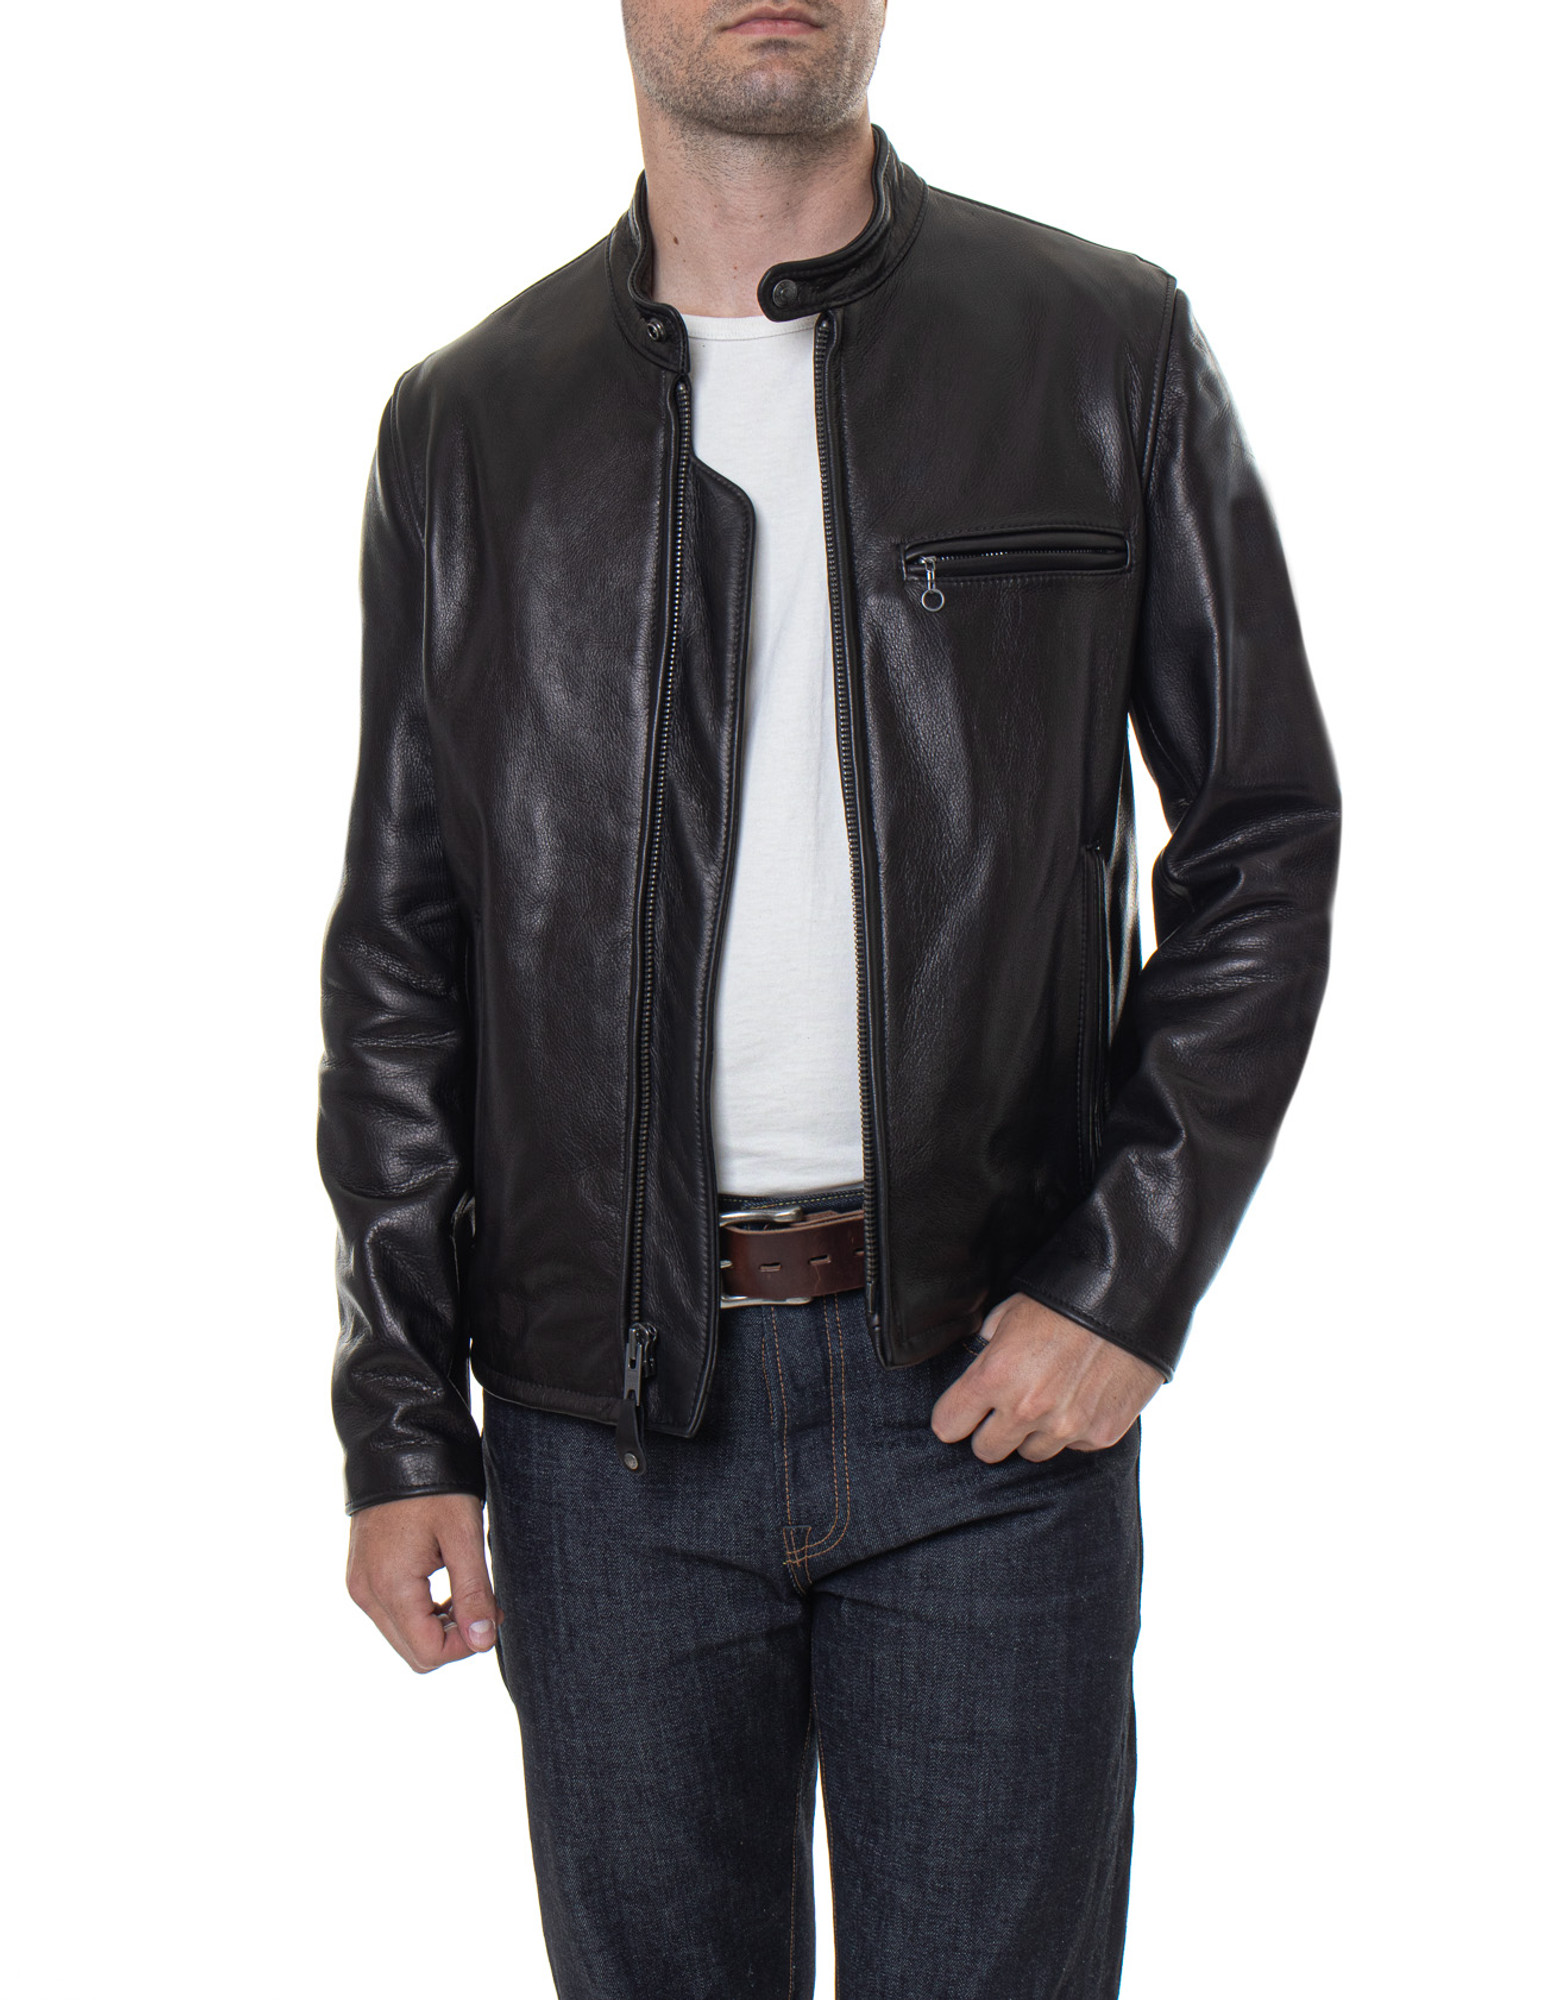 Style Number 530 Natural Pebbled Cowhide Café Leather Jacket